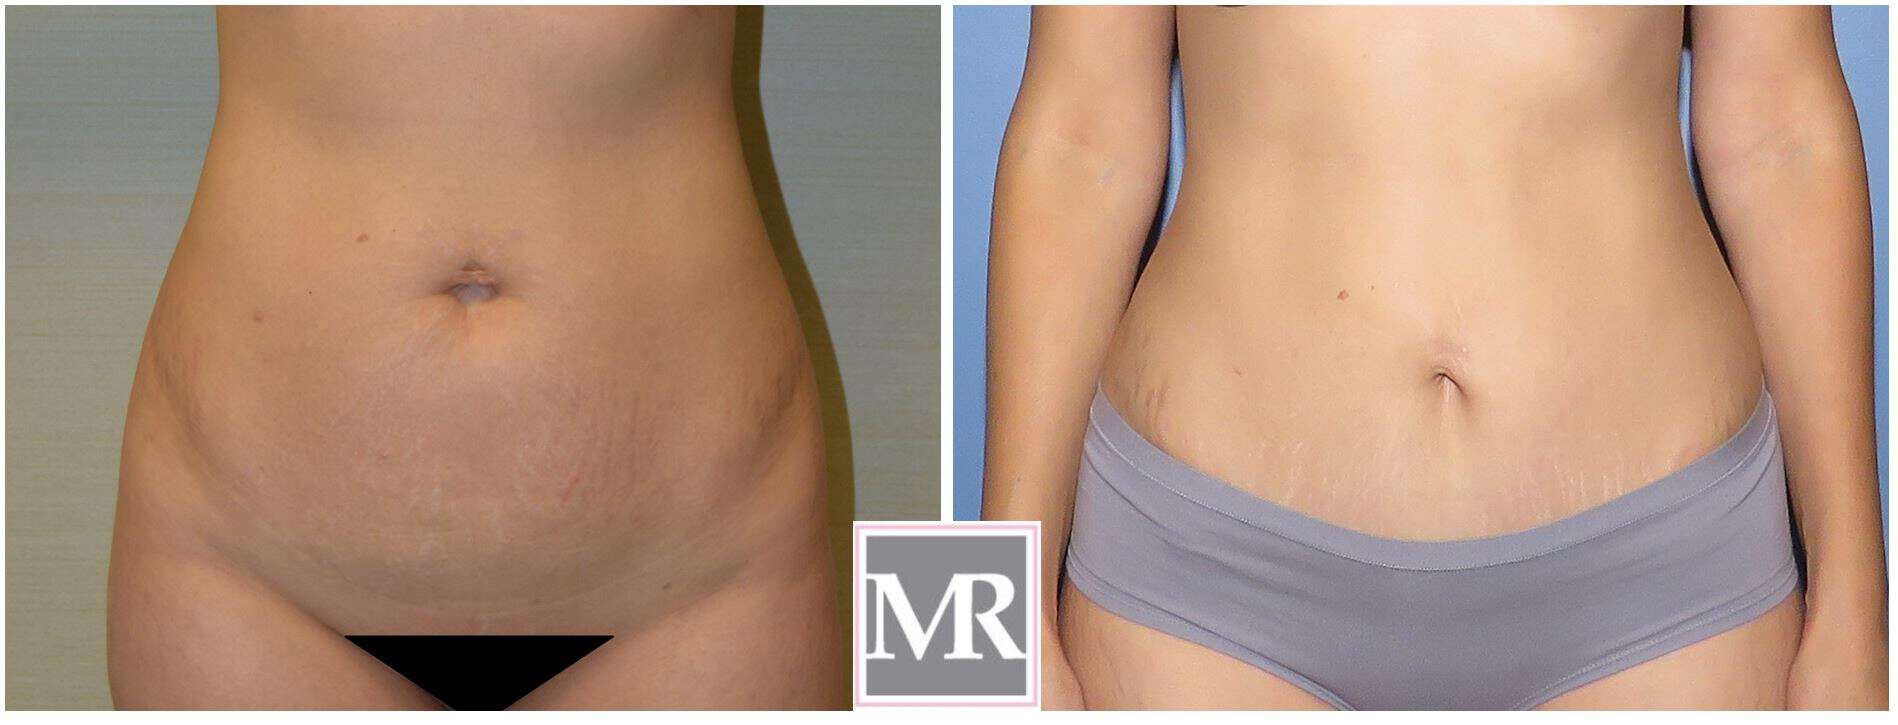 Mini-Tummy Tuck Before and After Beverly Hills - Millicent Rovelo MD